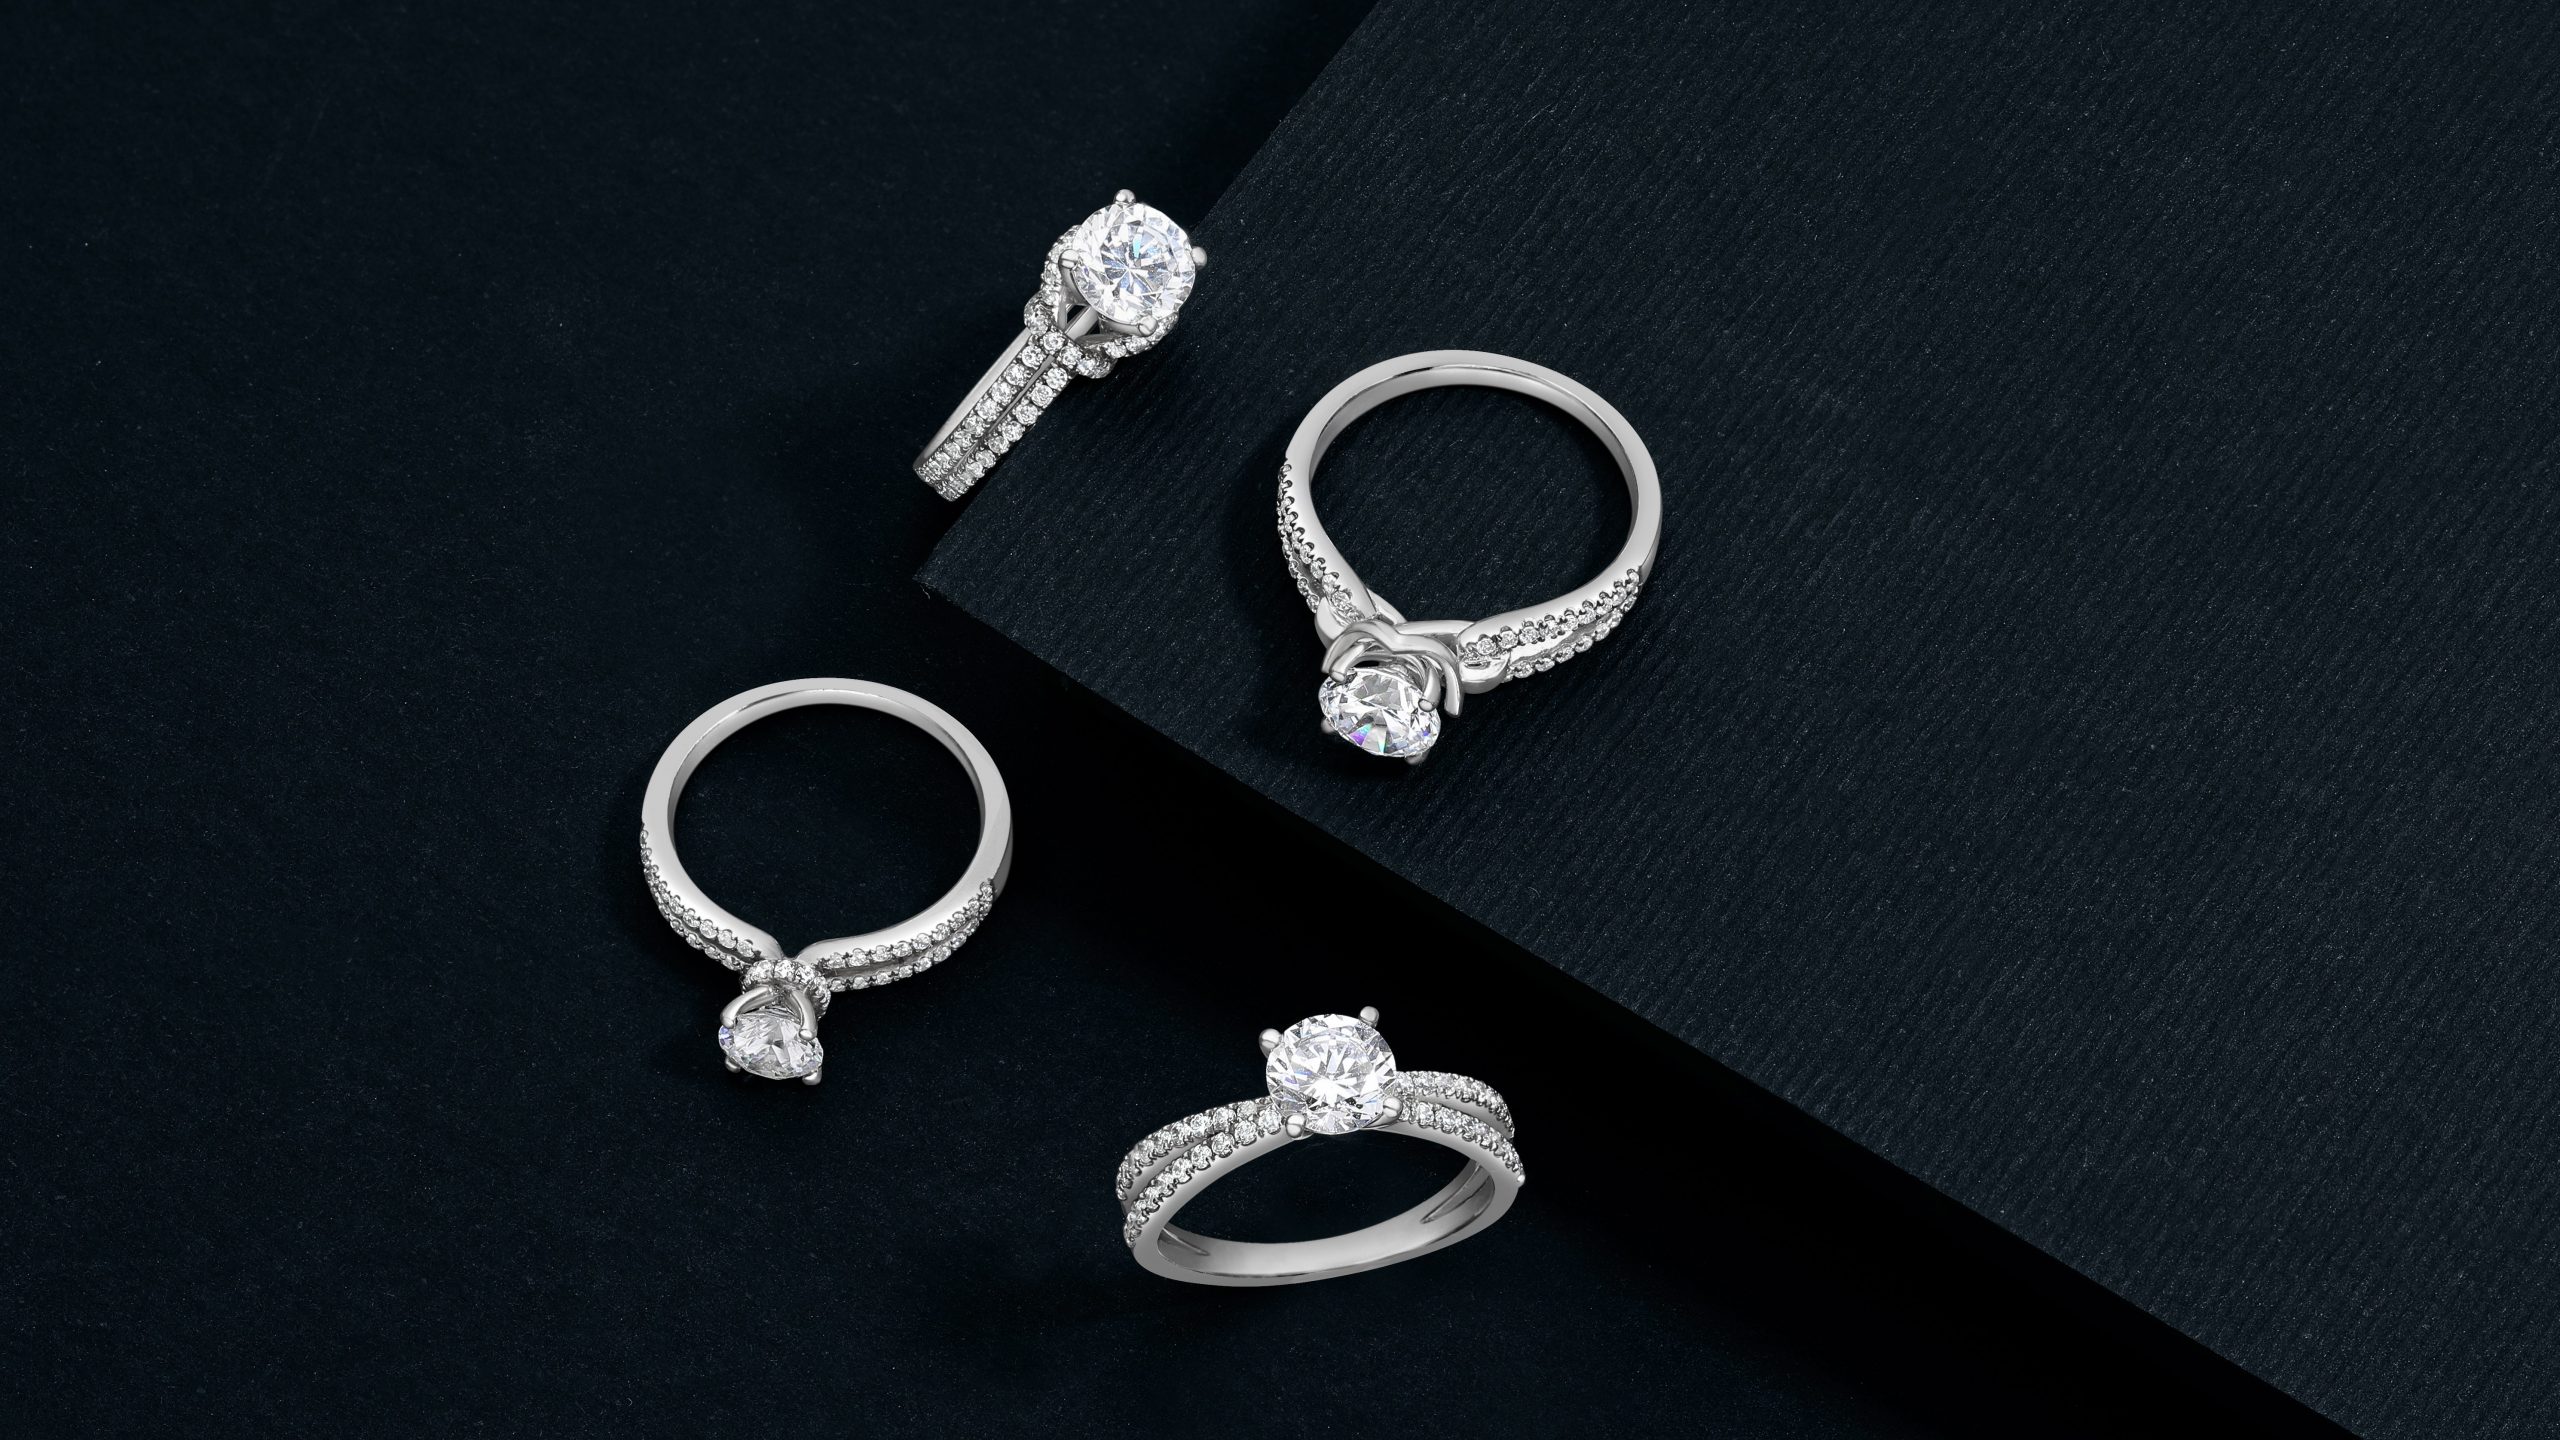 Choosing the Ideal Diamond Carat Size for Your Engagement Ring